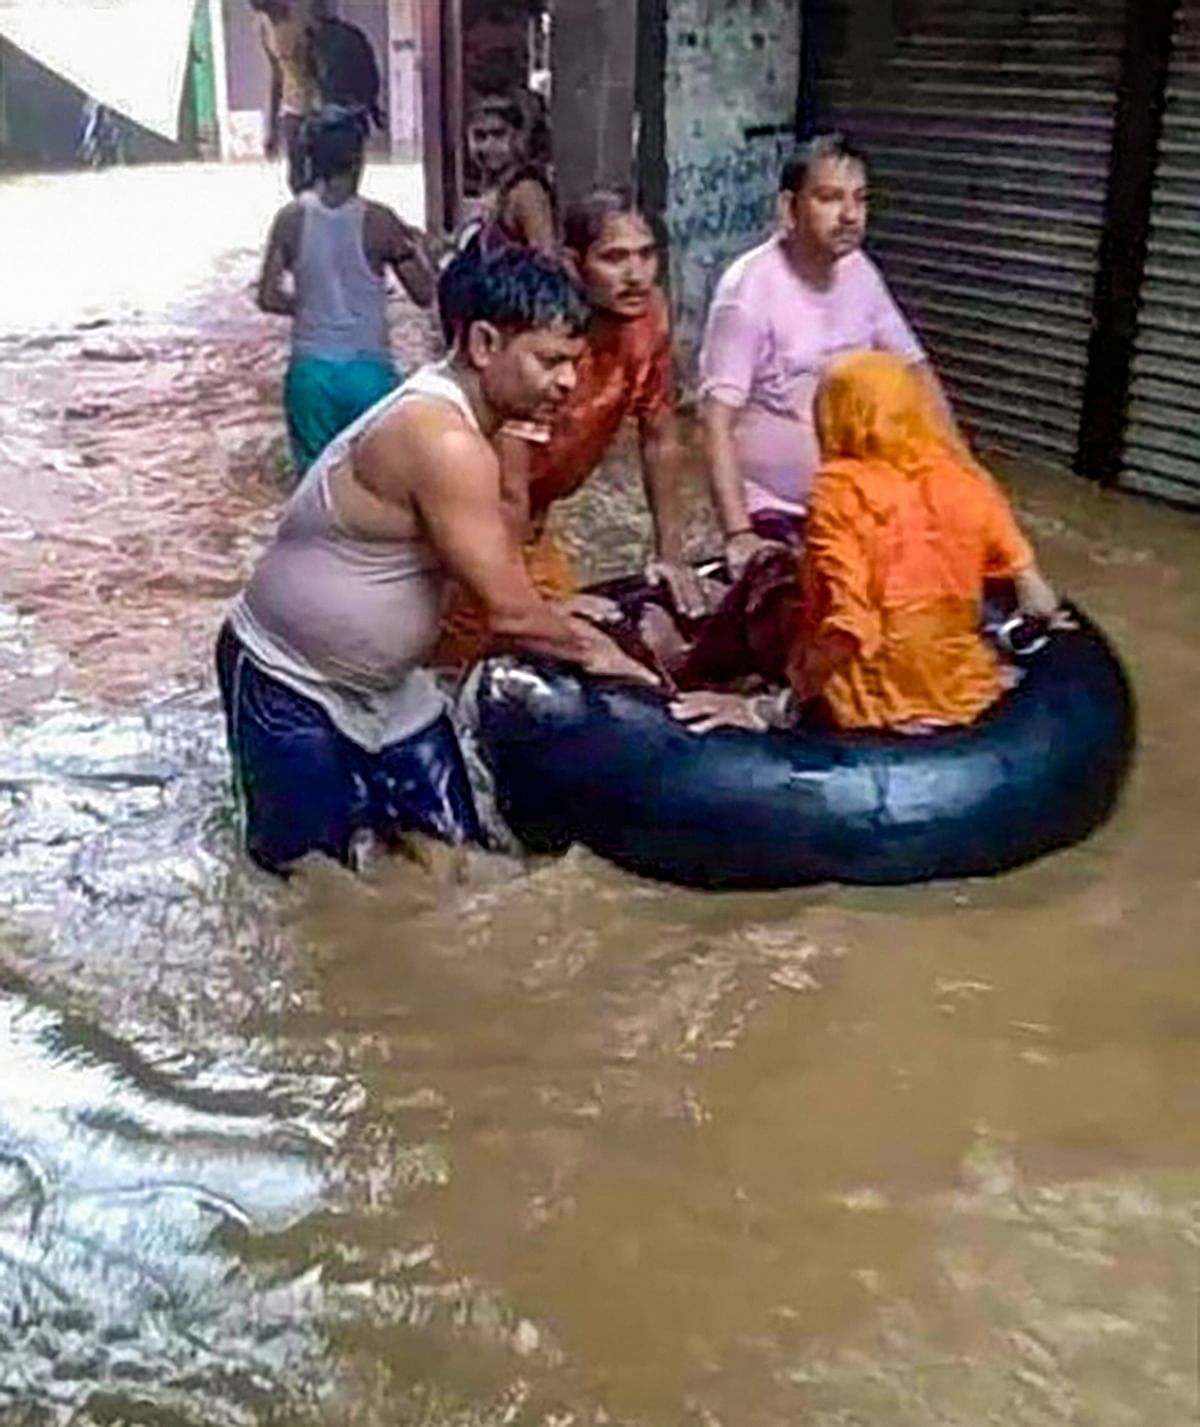 About 1,171 villages are affected due to heavy rains and floods in Shivpuri, Sheopur, Datia and Gwalior districts.